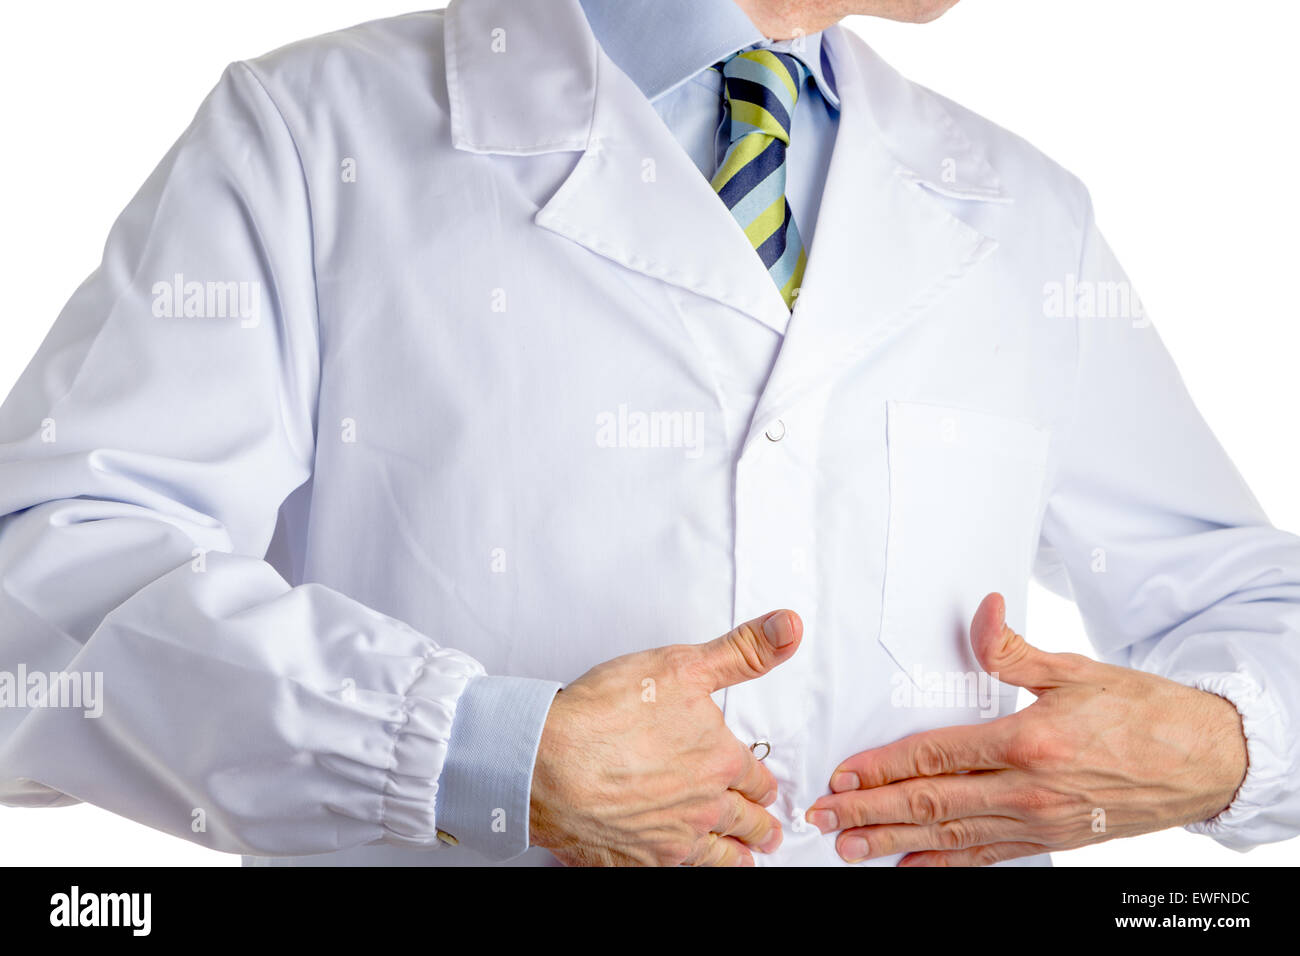 Man dressed with medical white coat, light blue shirt and glossy regimental tie with dark blue, light blue and green stripes, is pointing to his belly with both hands, driving attention to his stomach Stock Photo